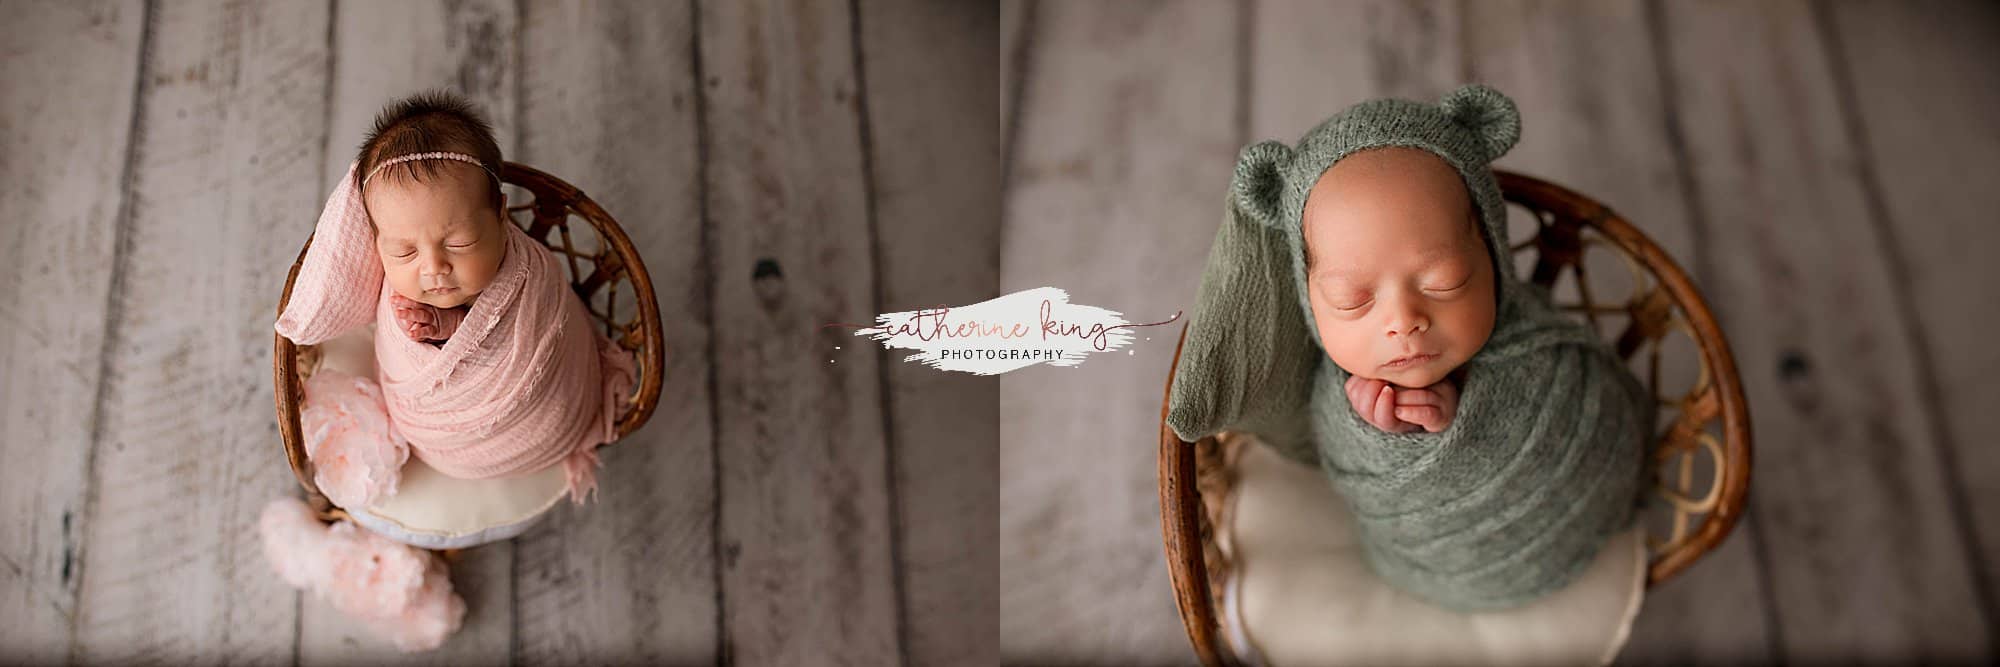 Individual shots from newborn twin baby photography